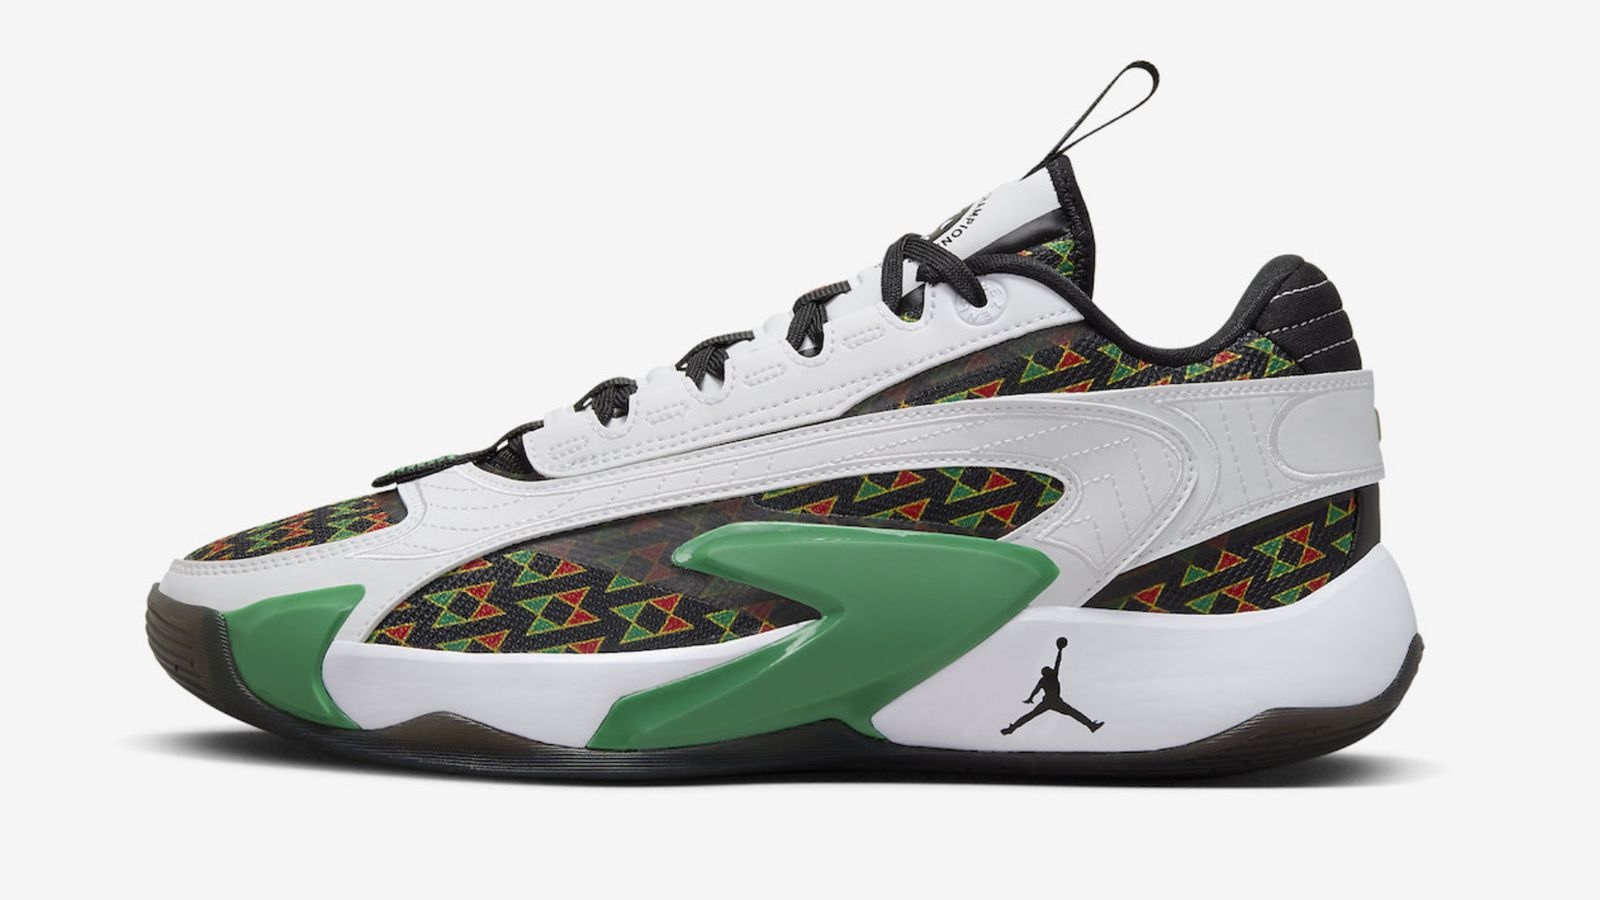 Jordan Luka 2 product image of a white and black Jordan sneaker featuring green overlays and red and green triangular details. 